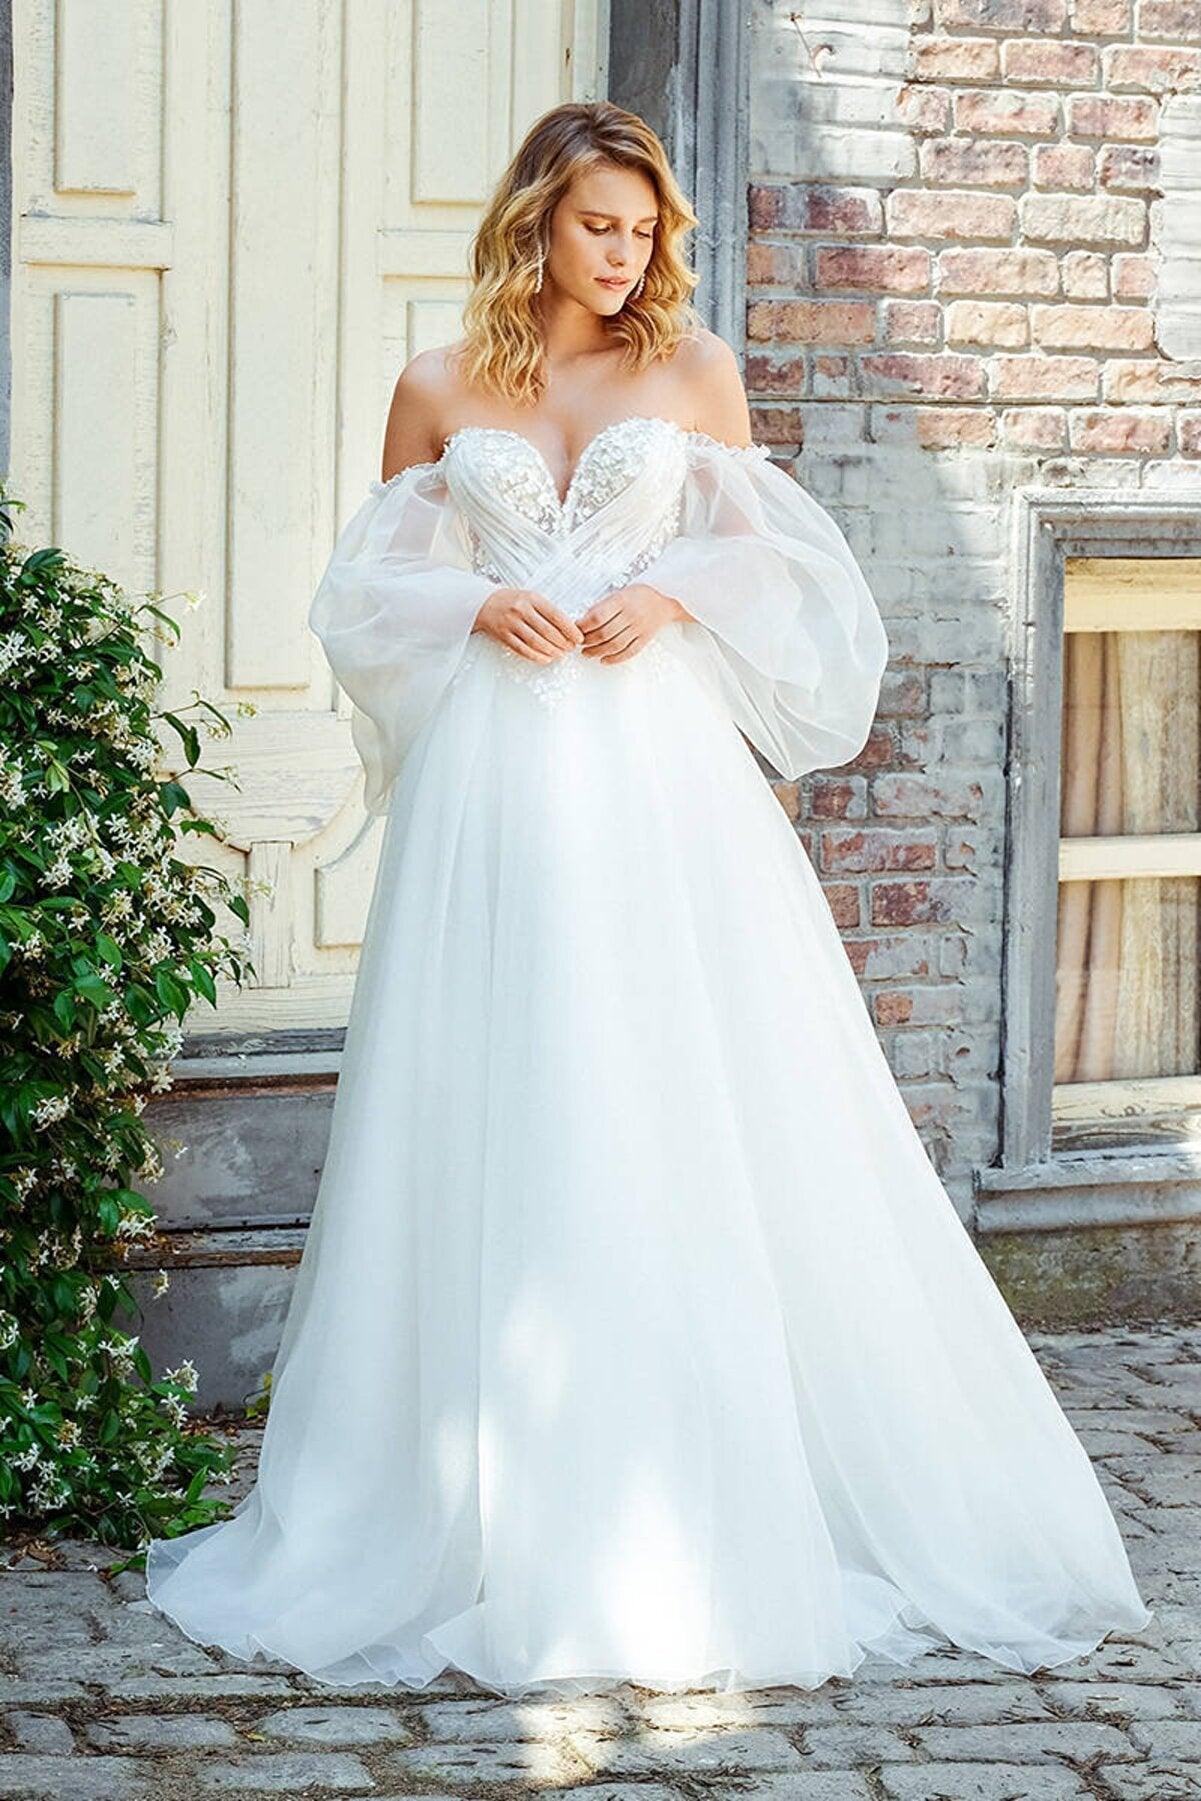 French Novelty: Adrianna Papell Platinum 31250 Balloon Hem Bridal Gown